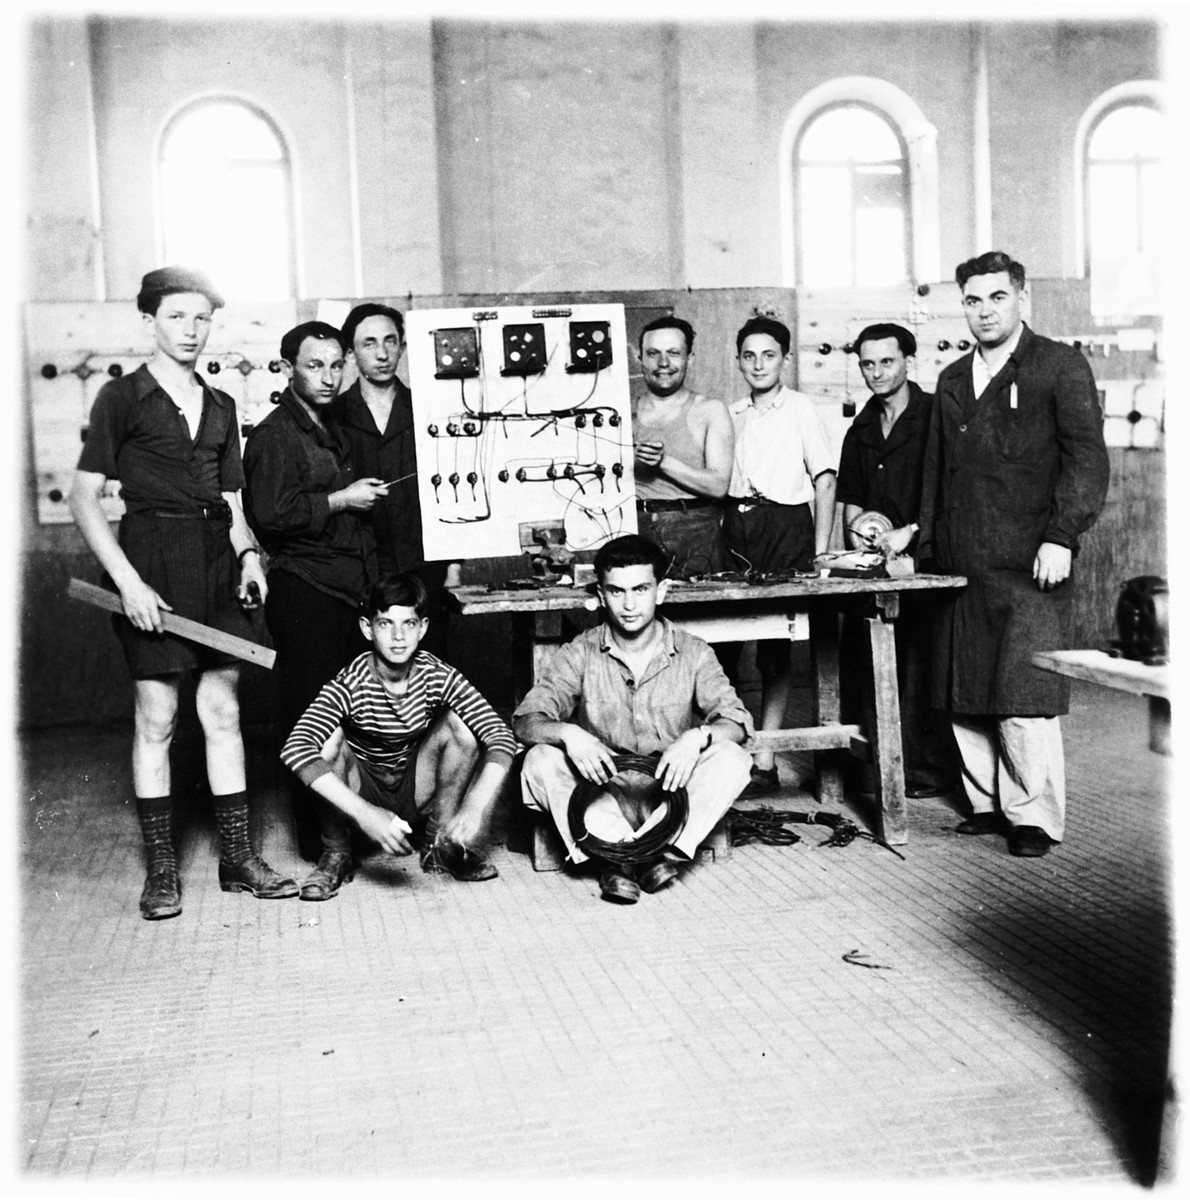 Jewish teenagers attend a vocational ORT school in the Cremona DP camp.

Shie Zoltak is standing on the far left.  The instructor (Shie's uncle) Abraham Lisogurski is standing on the right.